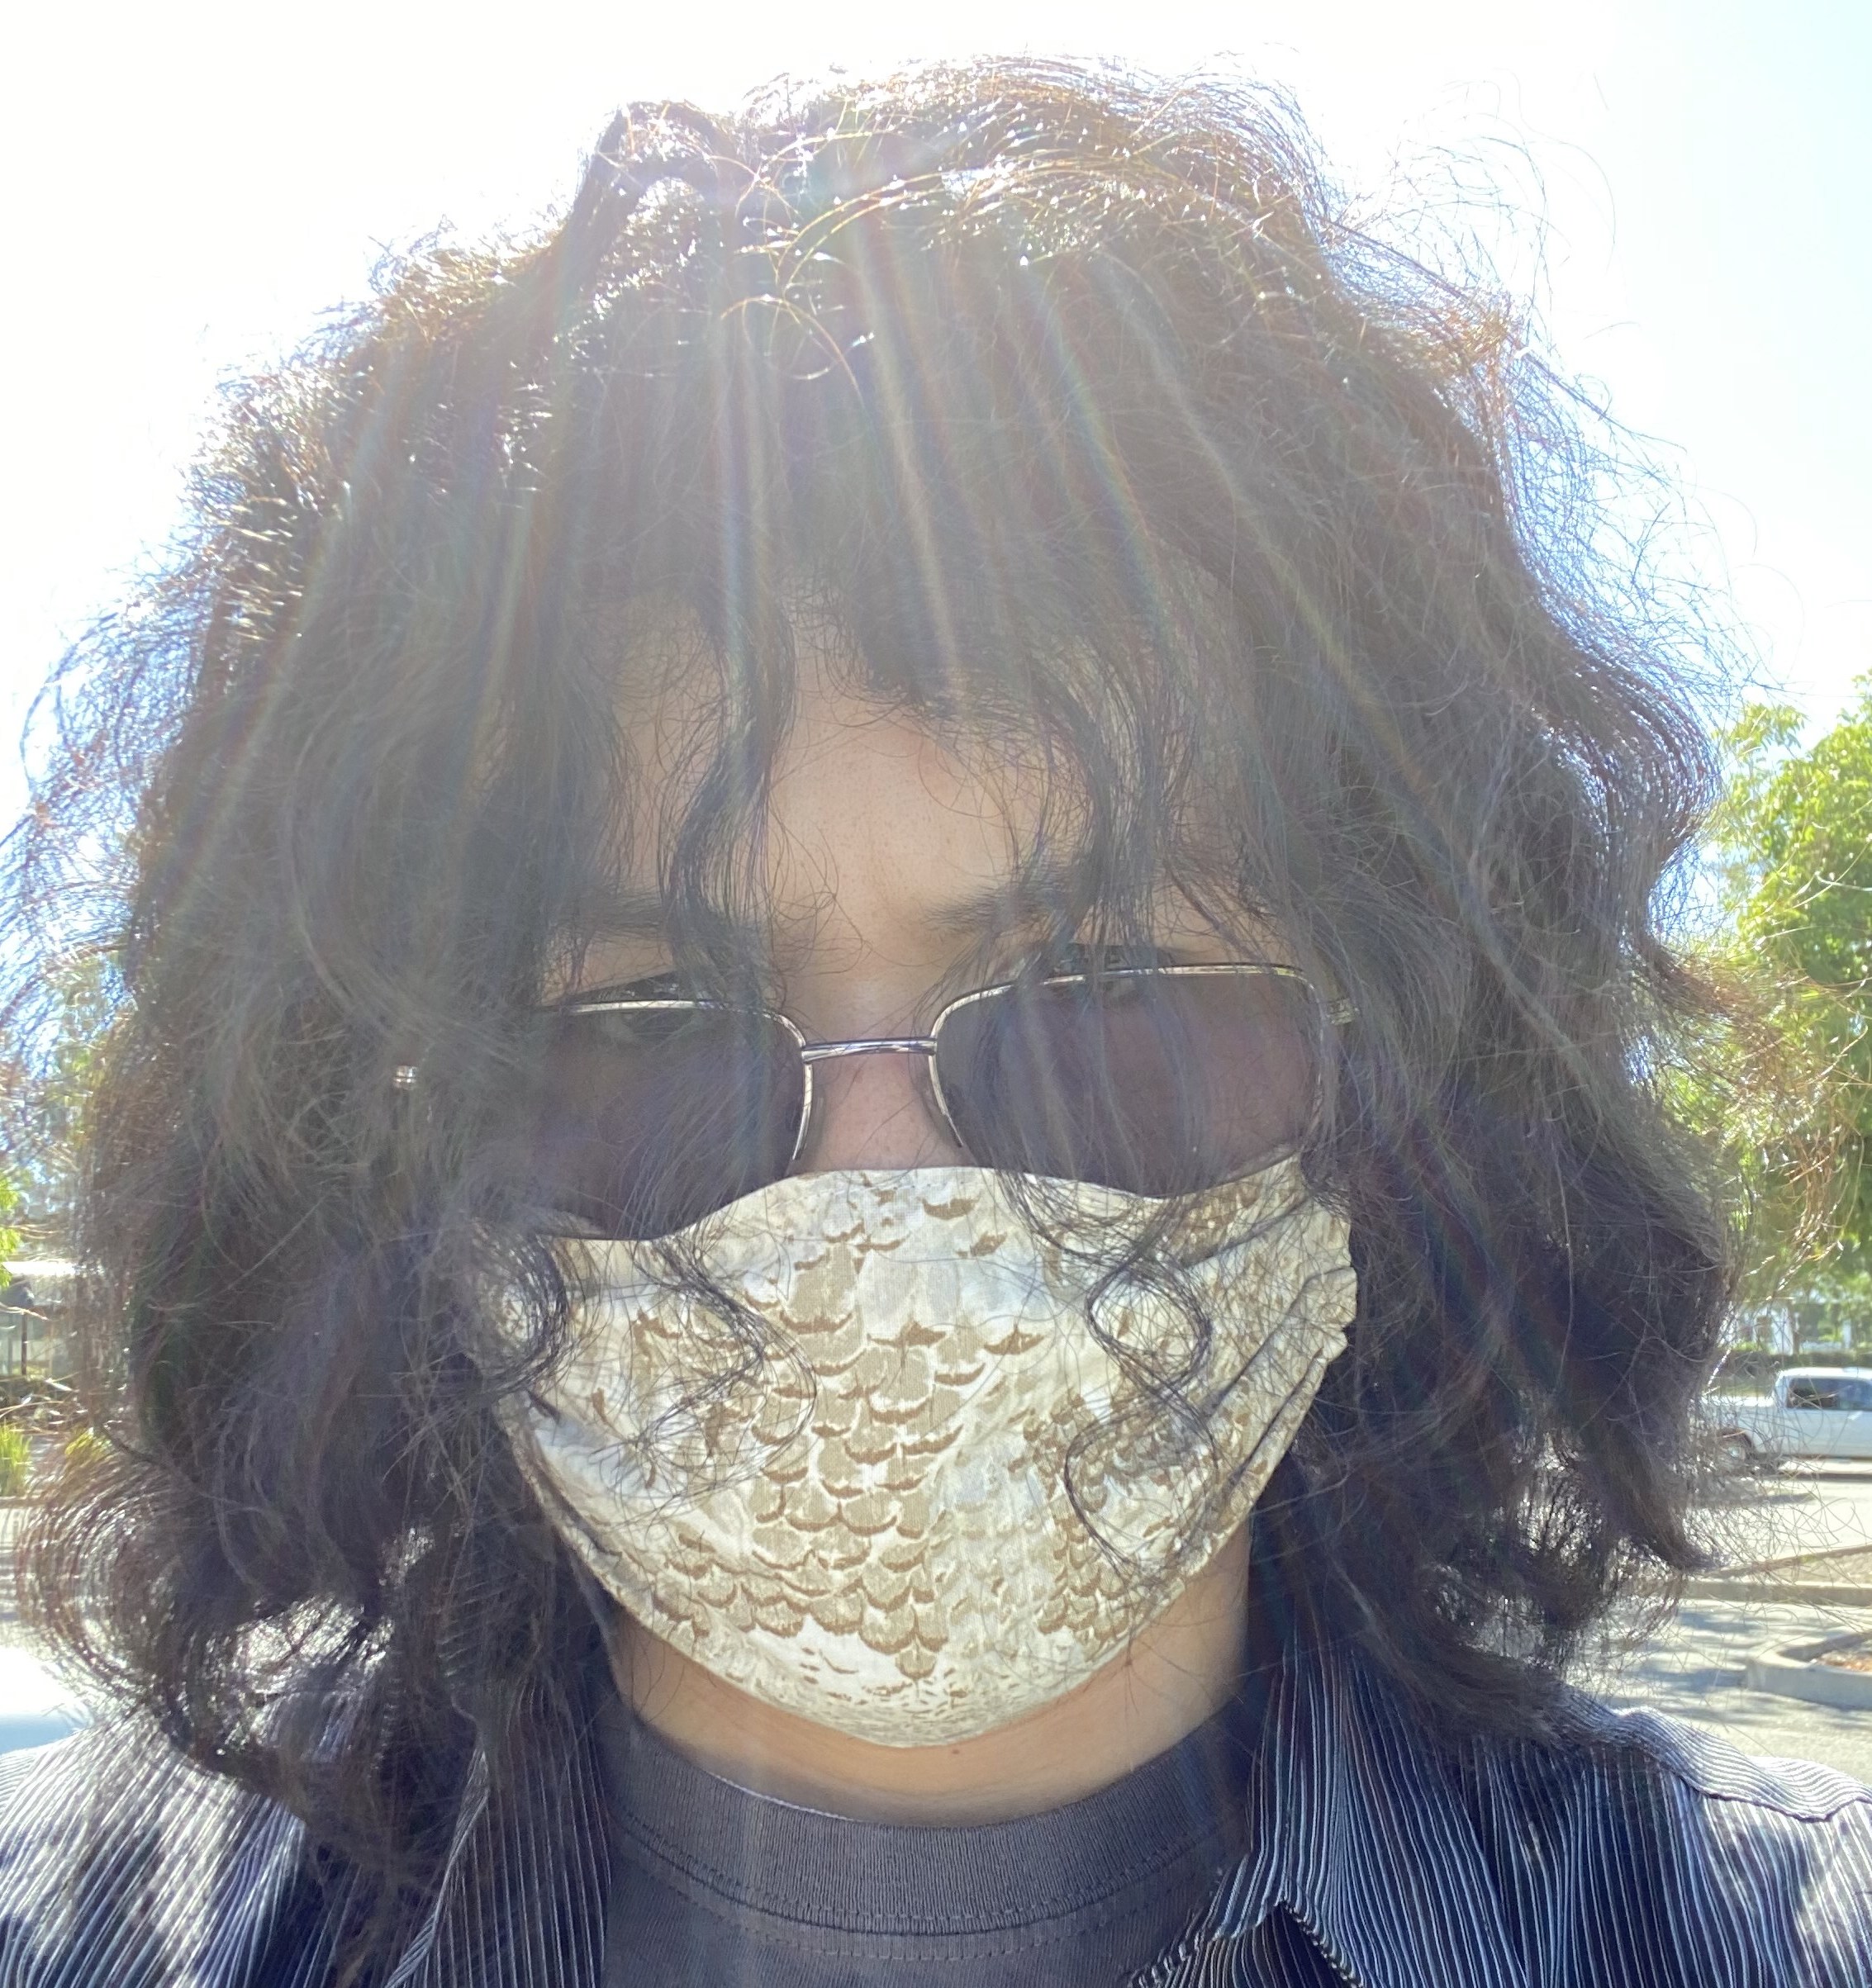 A young man wearing a mask and sunglasses with long curly hair.